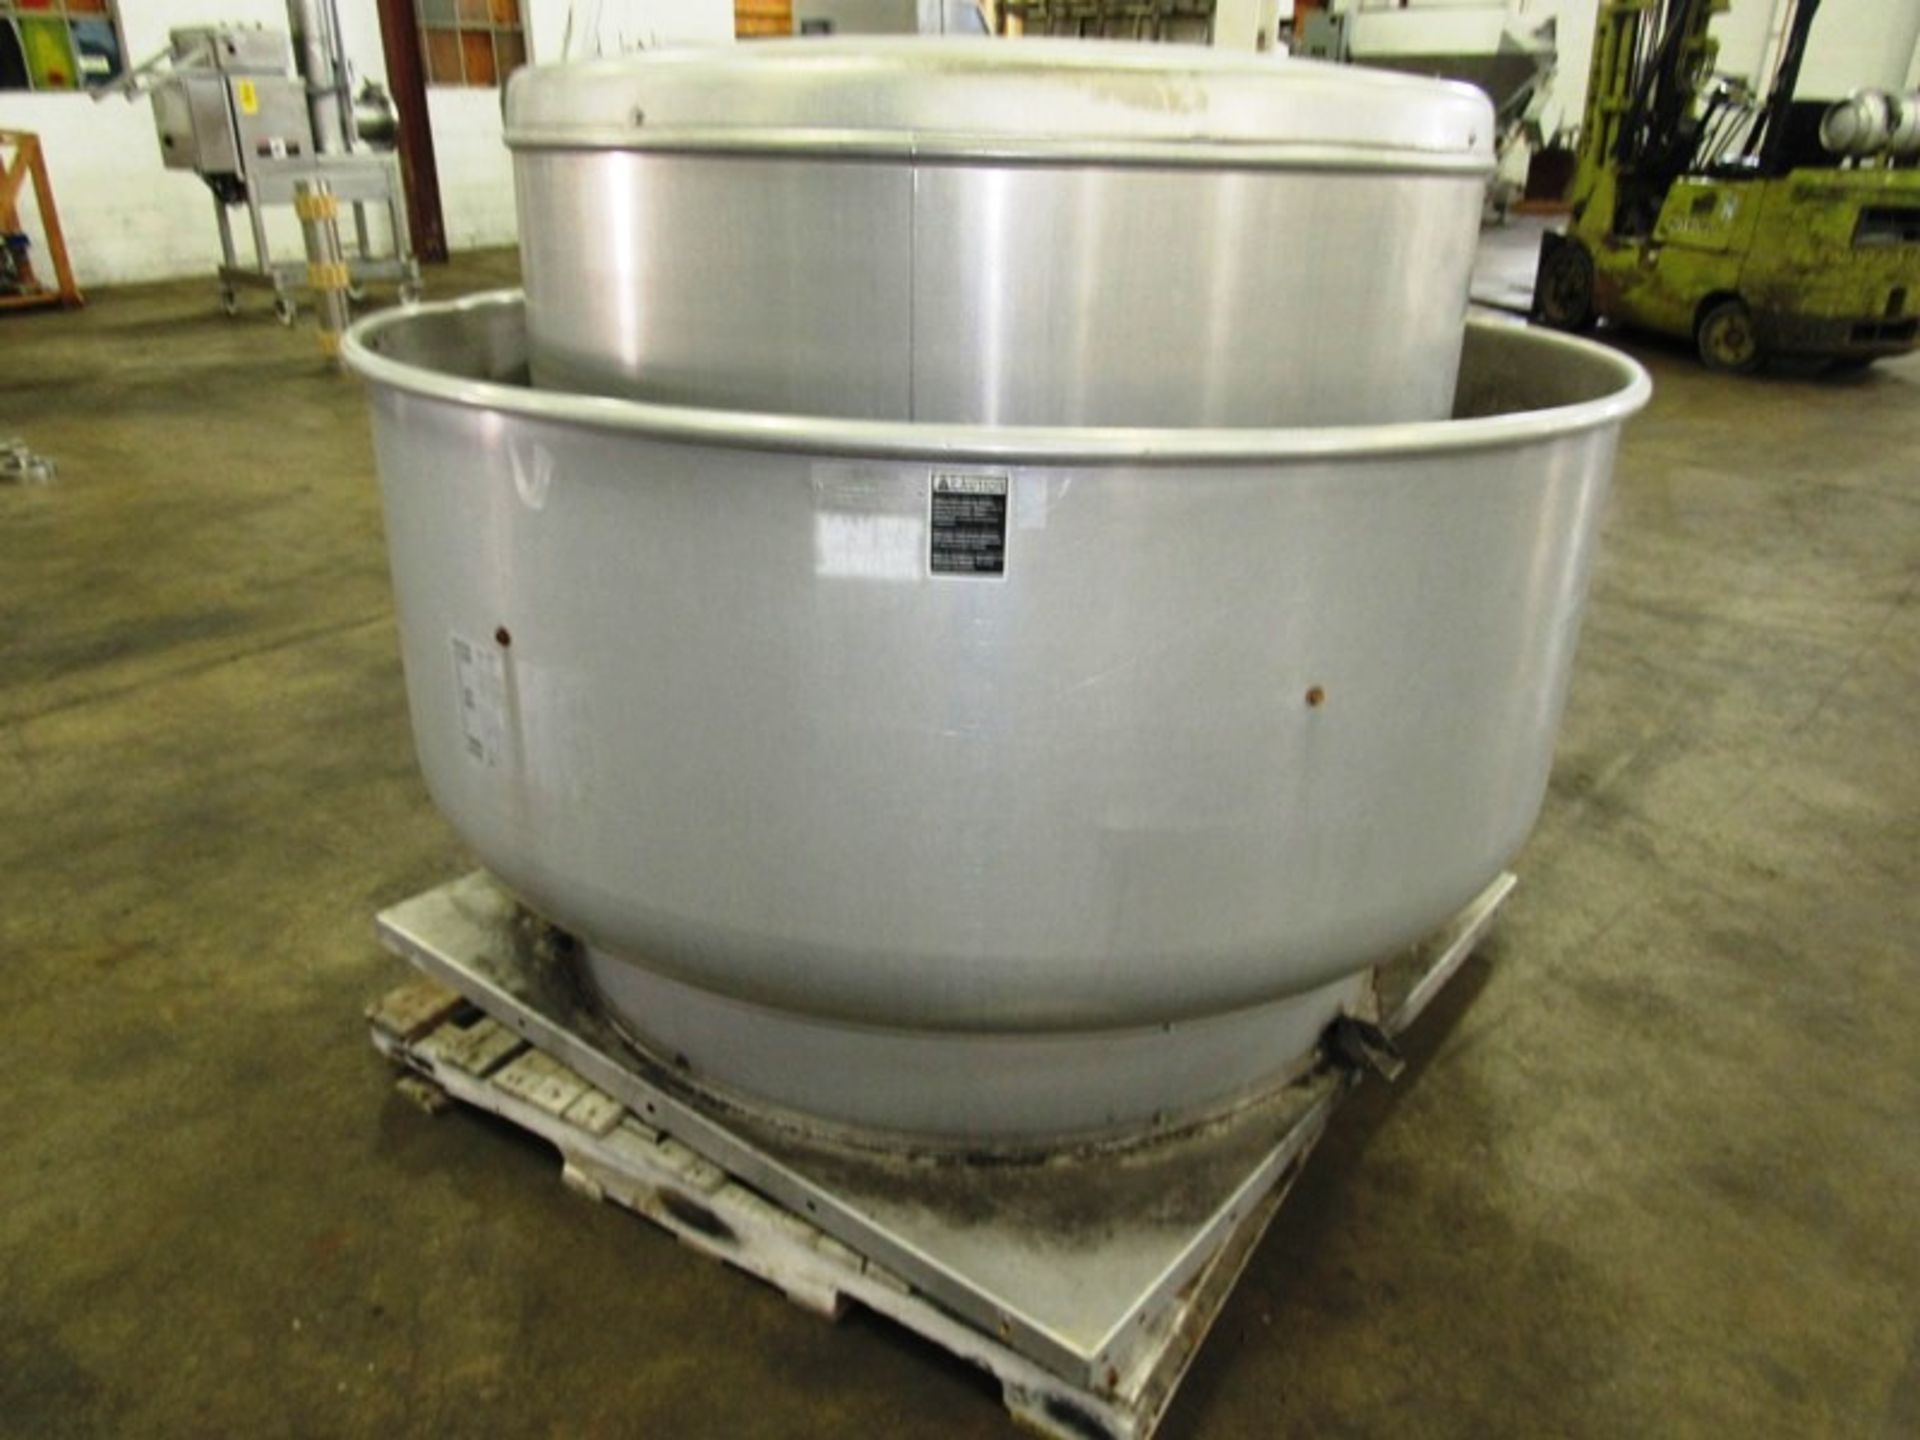 Greenheck Mdl. Cube-420-75-X Stainless Steel Rooftop Exhaust, 64" Dia., 52 1/2" base, Ser. # - Image 2 of 2